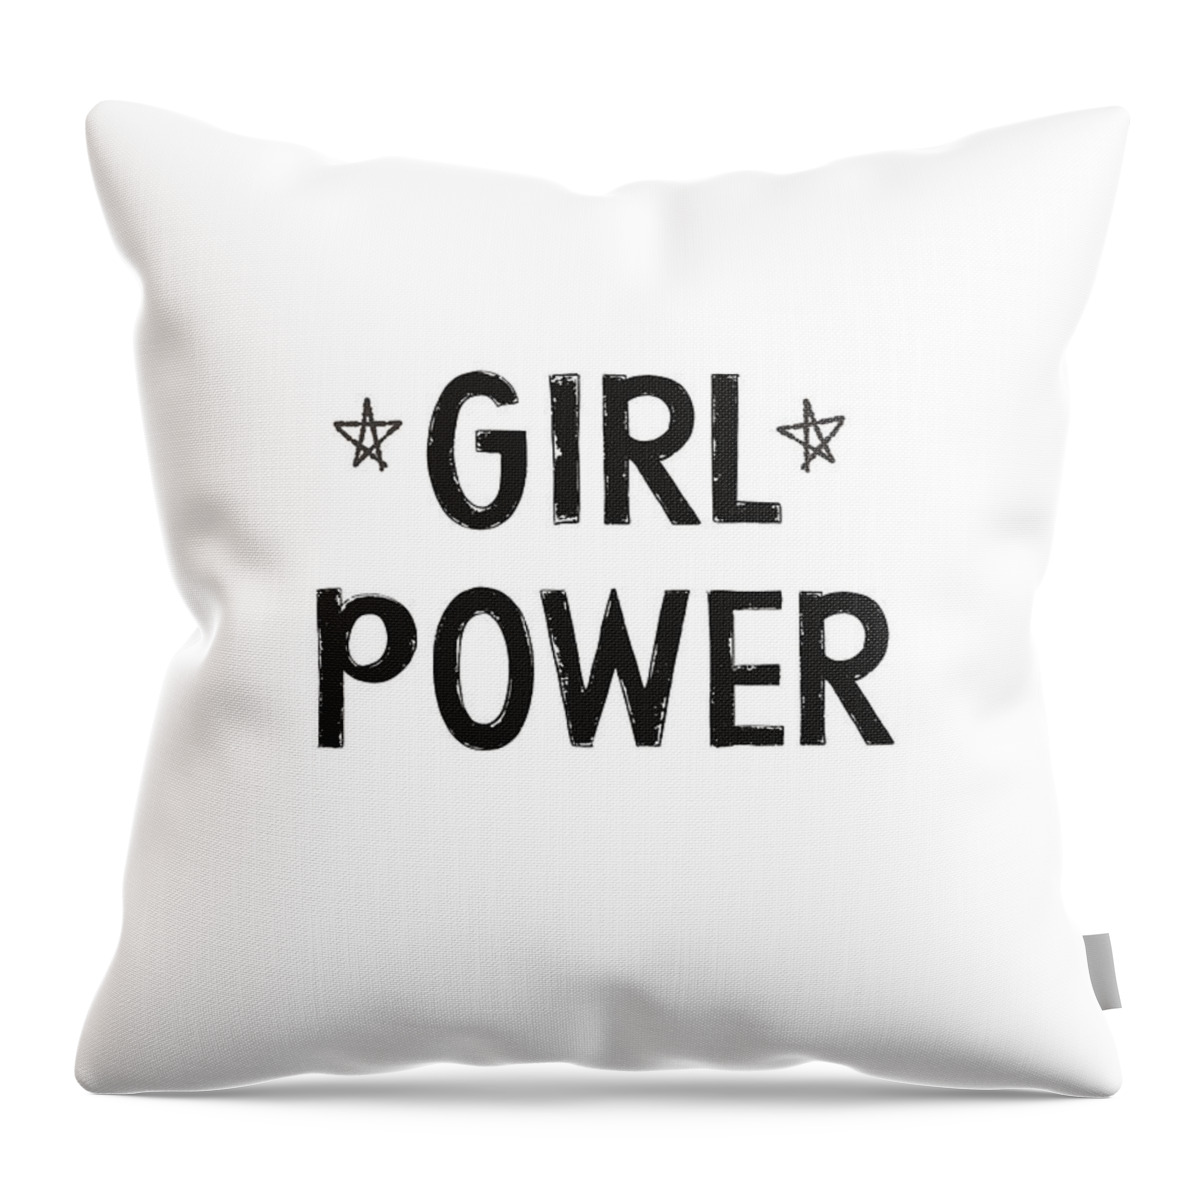 Girl Power Throw Pillow featuring the digital art Girl Power- Design by Linda Woods by Linda Woods